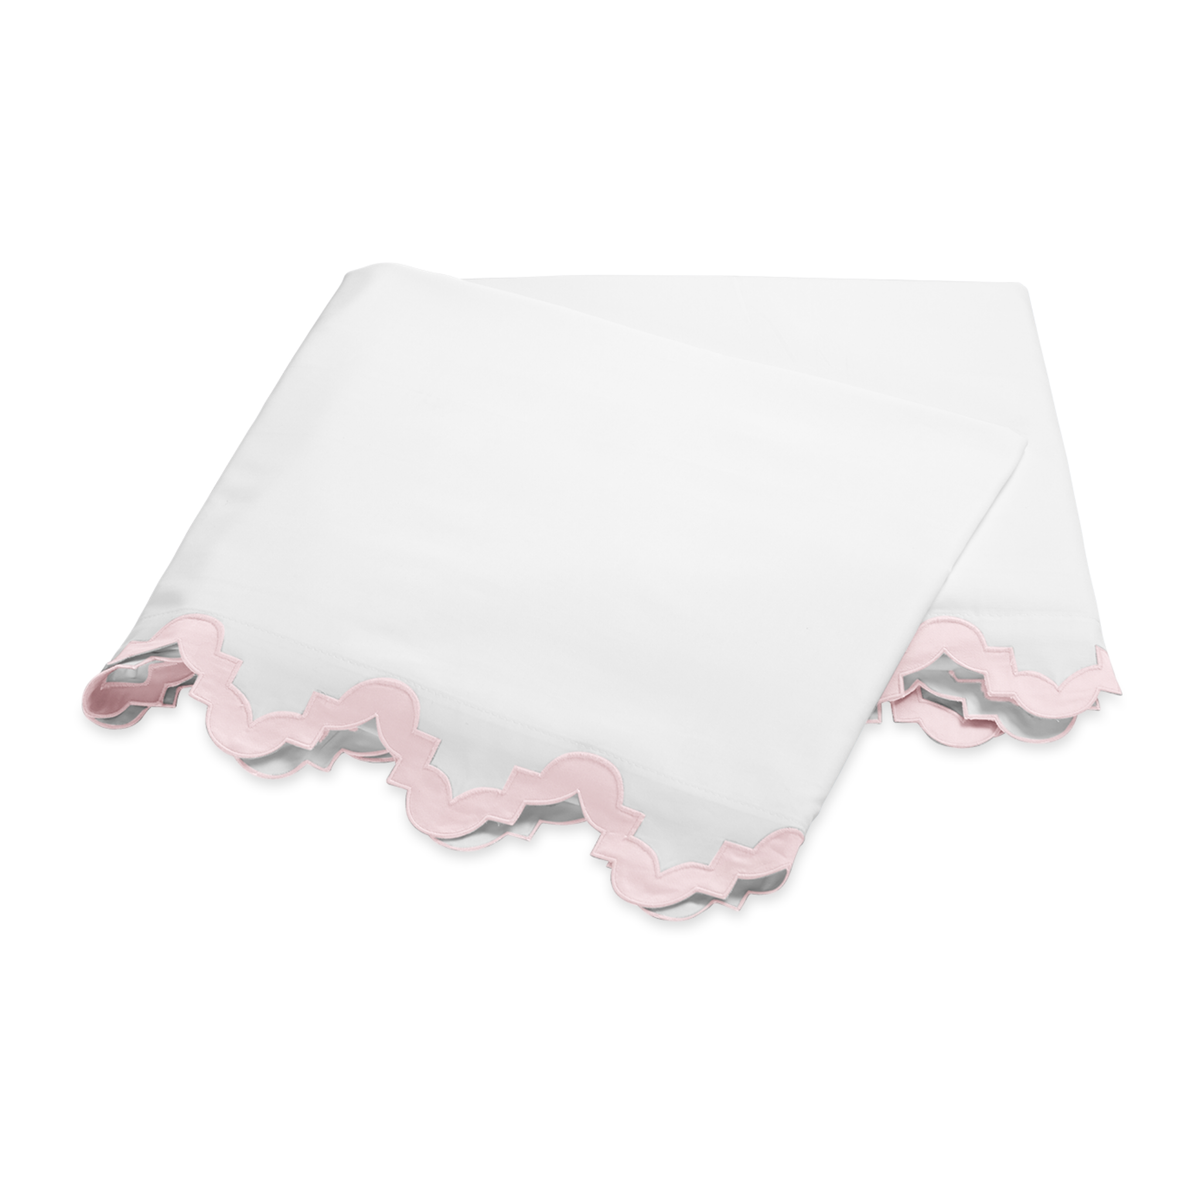 Folded Flat Sheet of Matouk Aziza Bedding in Pink Color